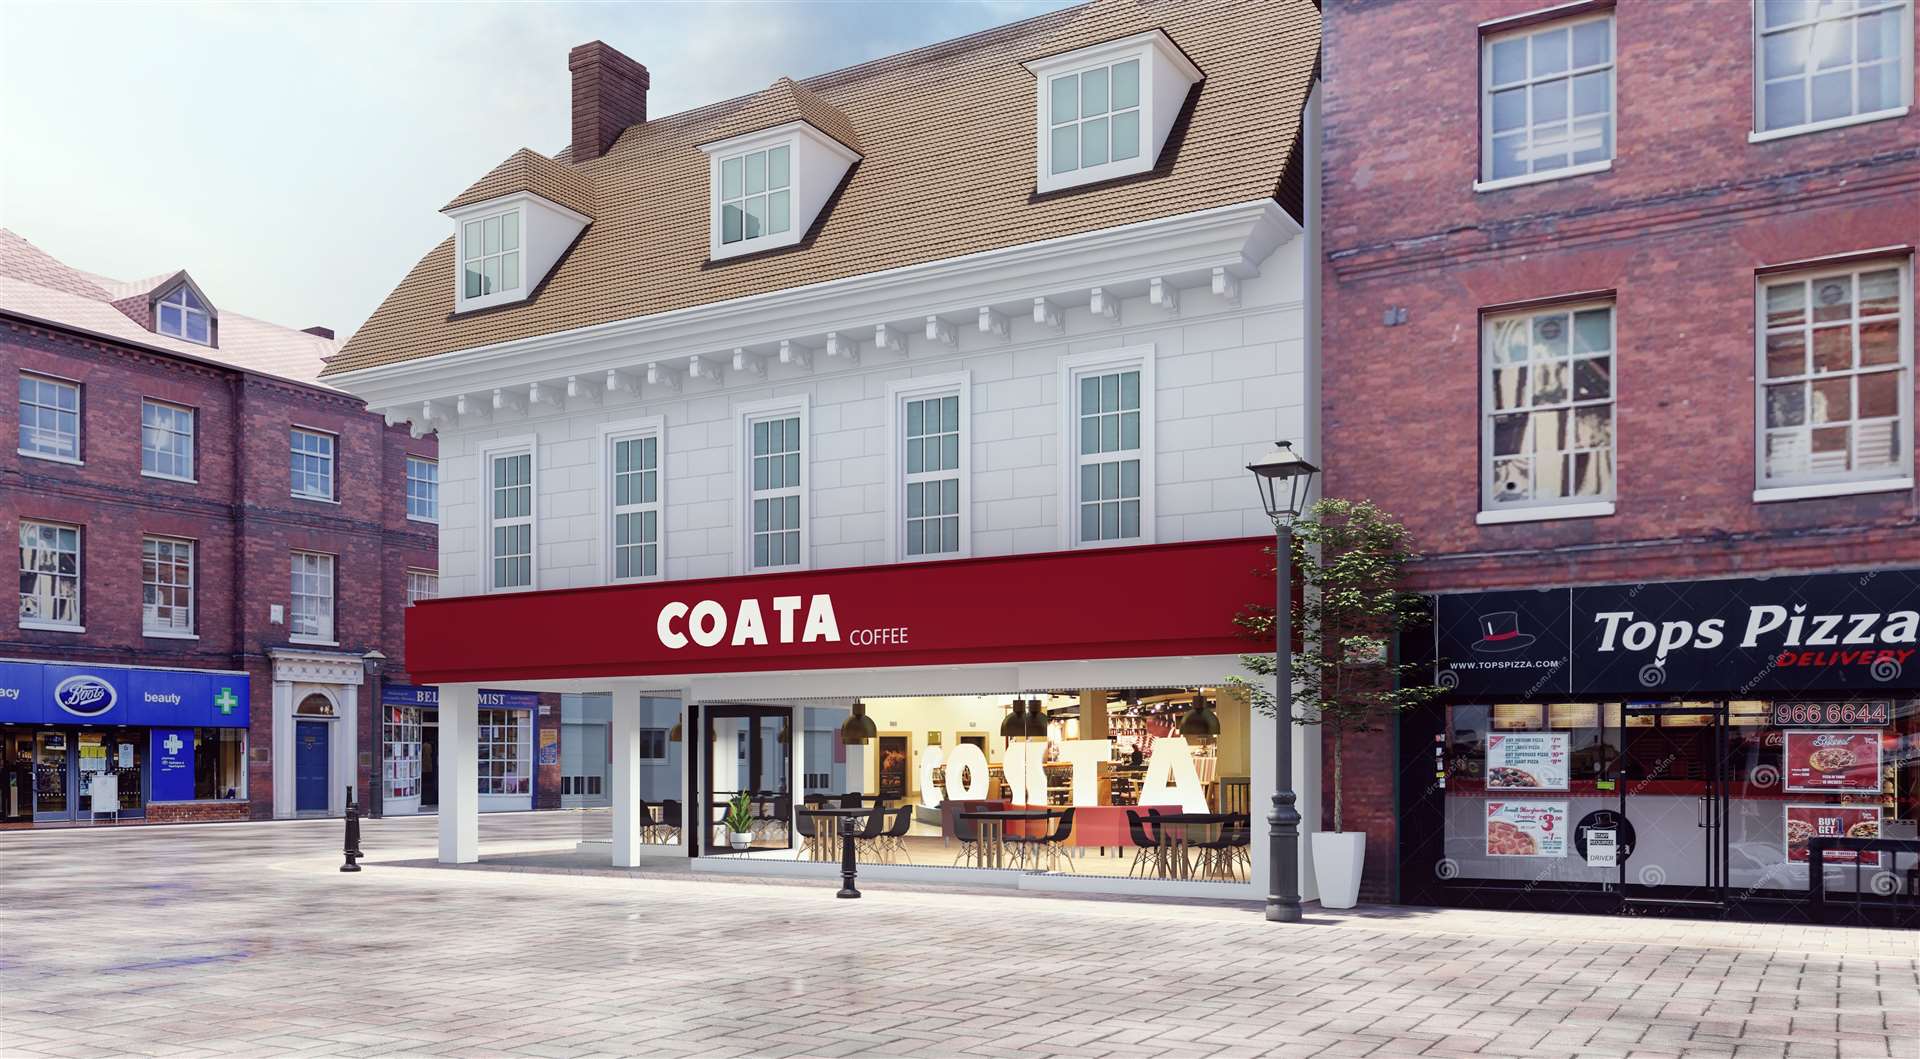 Bosses want to attract big-name chains like Costa Coffee